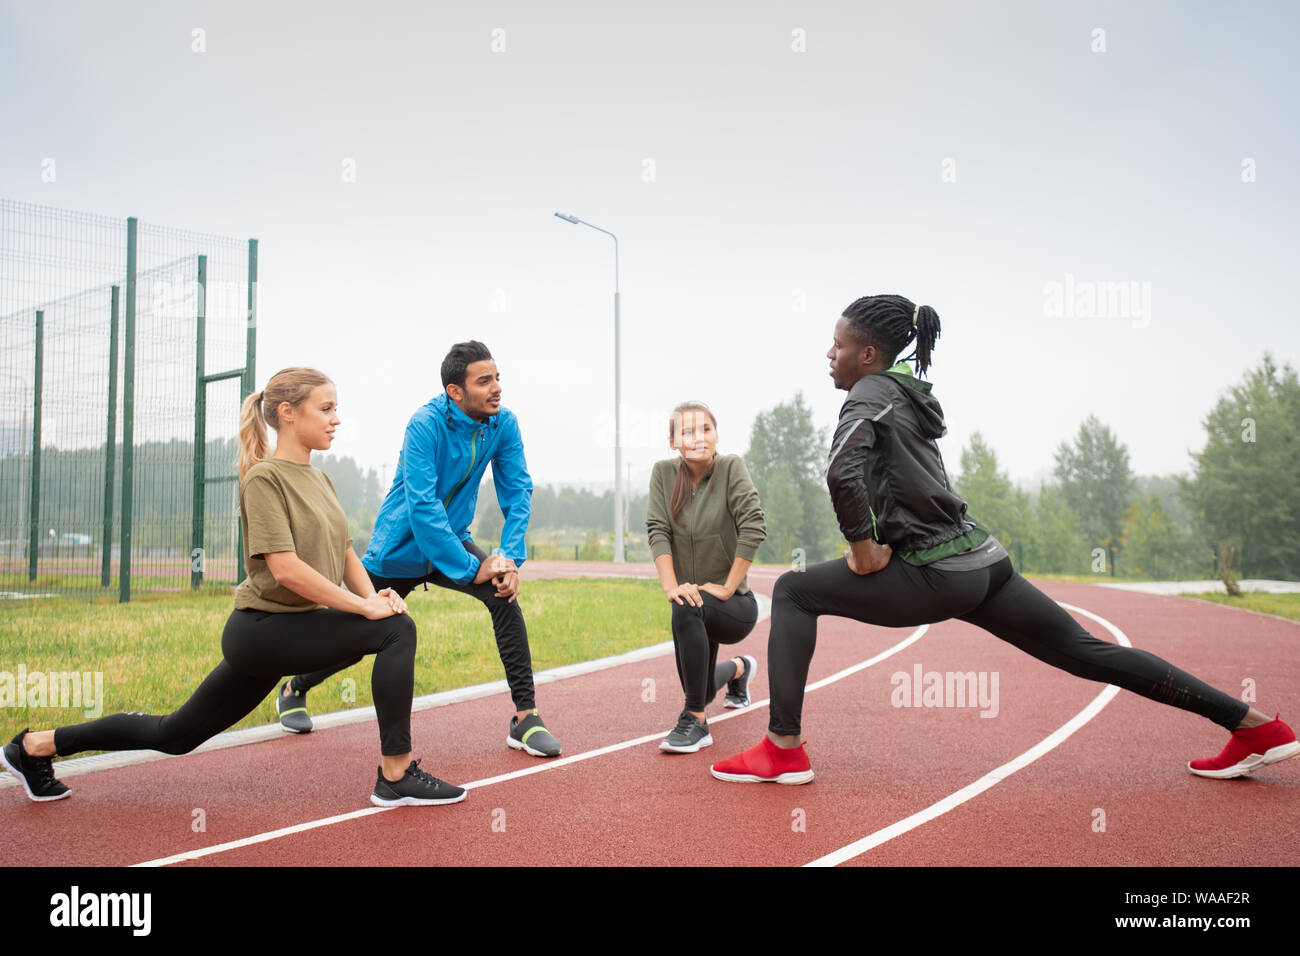 Four young friendly active people in sportswear exercising on racetracks Stock Photo